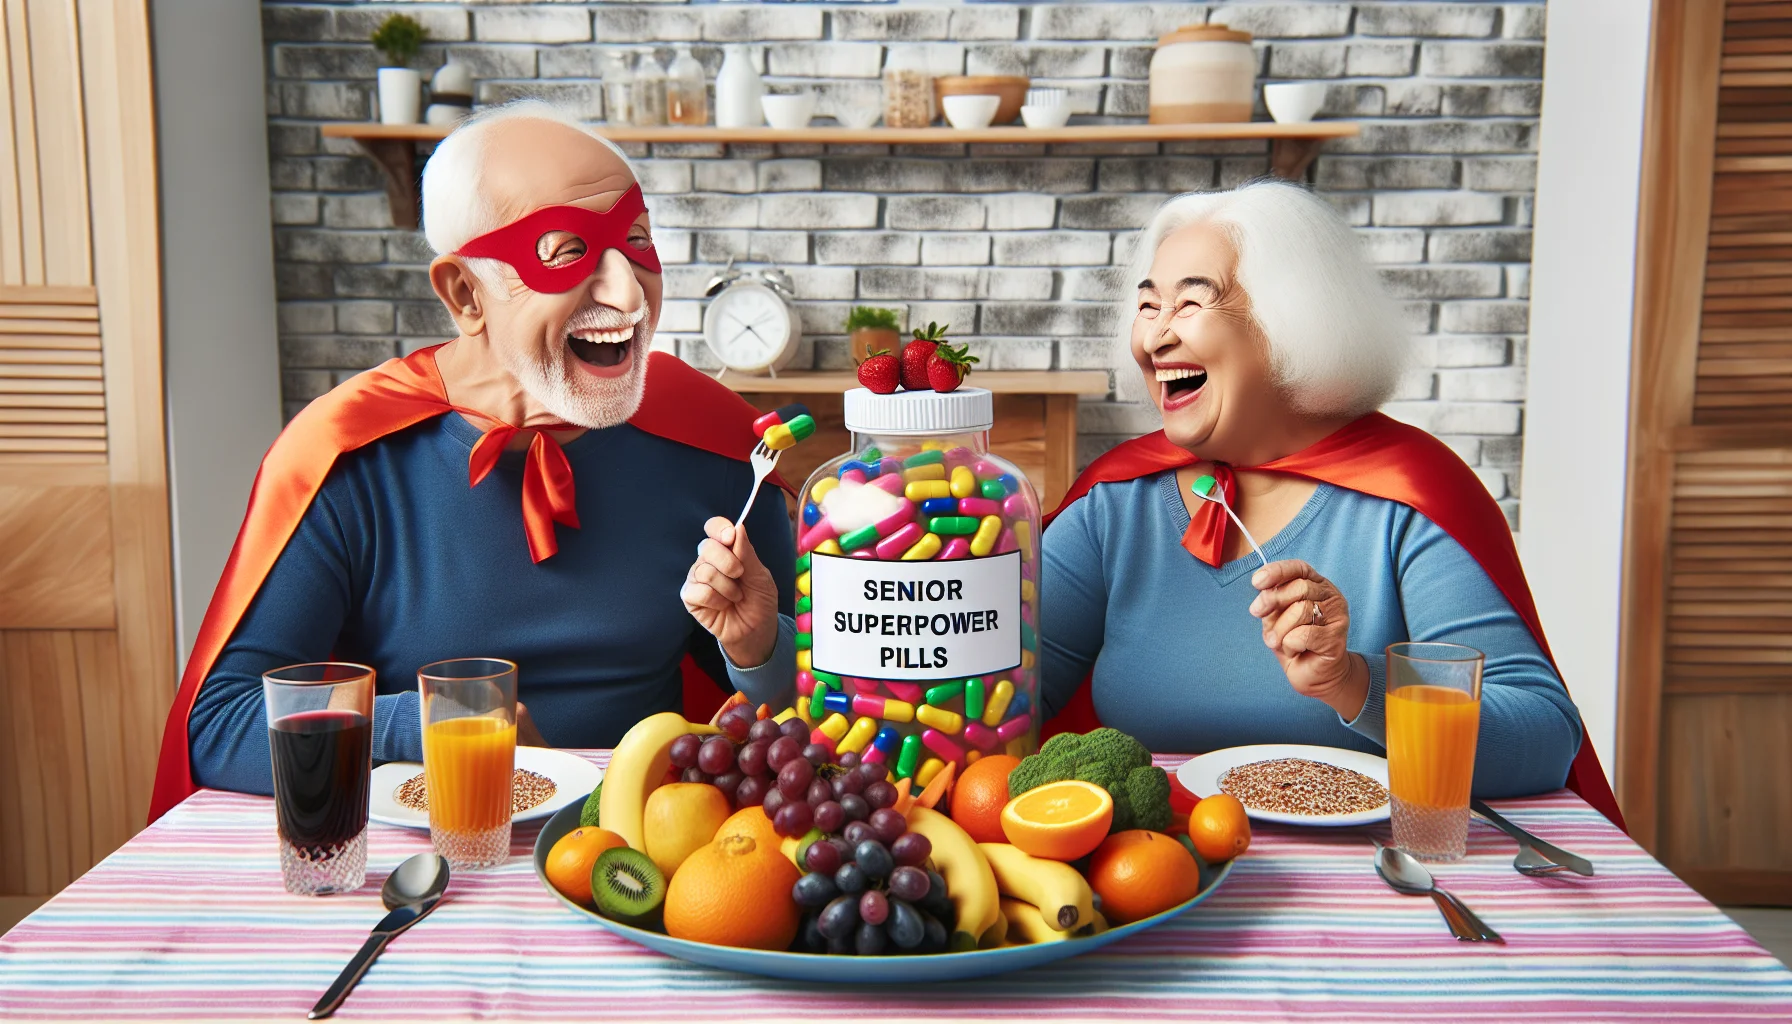 Generate a humorous image of an elderly Caucasian man and a Middle-Eastern woman, both over 70 years old, sitting at a colorful dining table set for two. The duo is laughing heartily while wearing superhero capes and masks, symbolizing their strong health. On the table, there's a gigantic bottle of multivitamins that's humorously labeled 'Senior Superpower Pills'. They're enjoying a variety of brightly colored fruits, vegetables, and whole grains, playfully arranged in patterns resembling youthful cartoon characters, highlighting the fun side of maintaining a balanced diet for seniors.